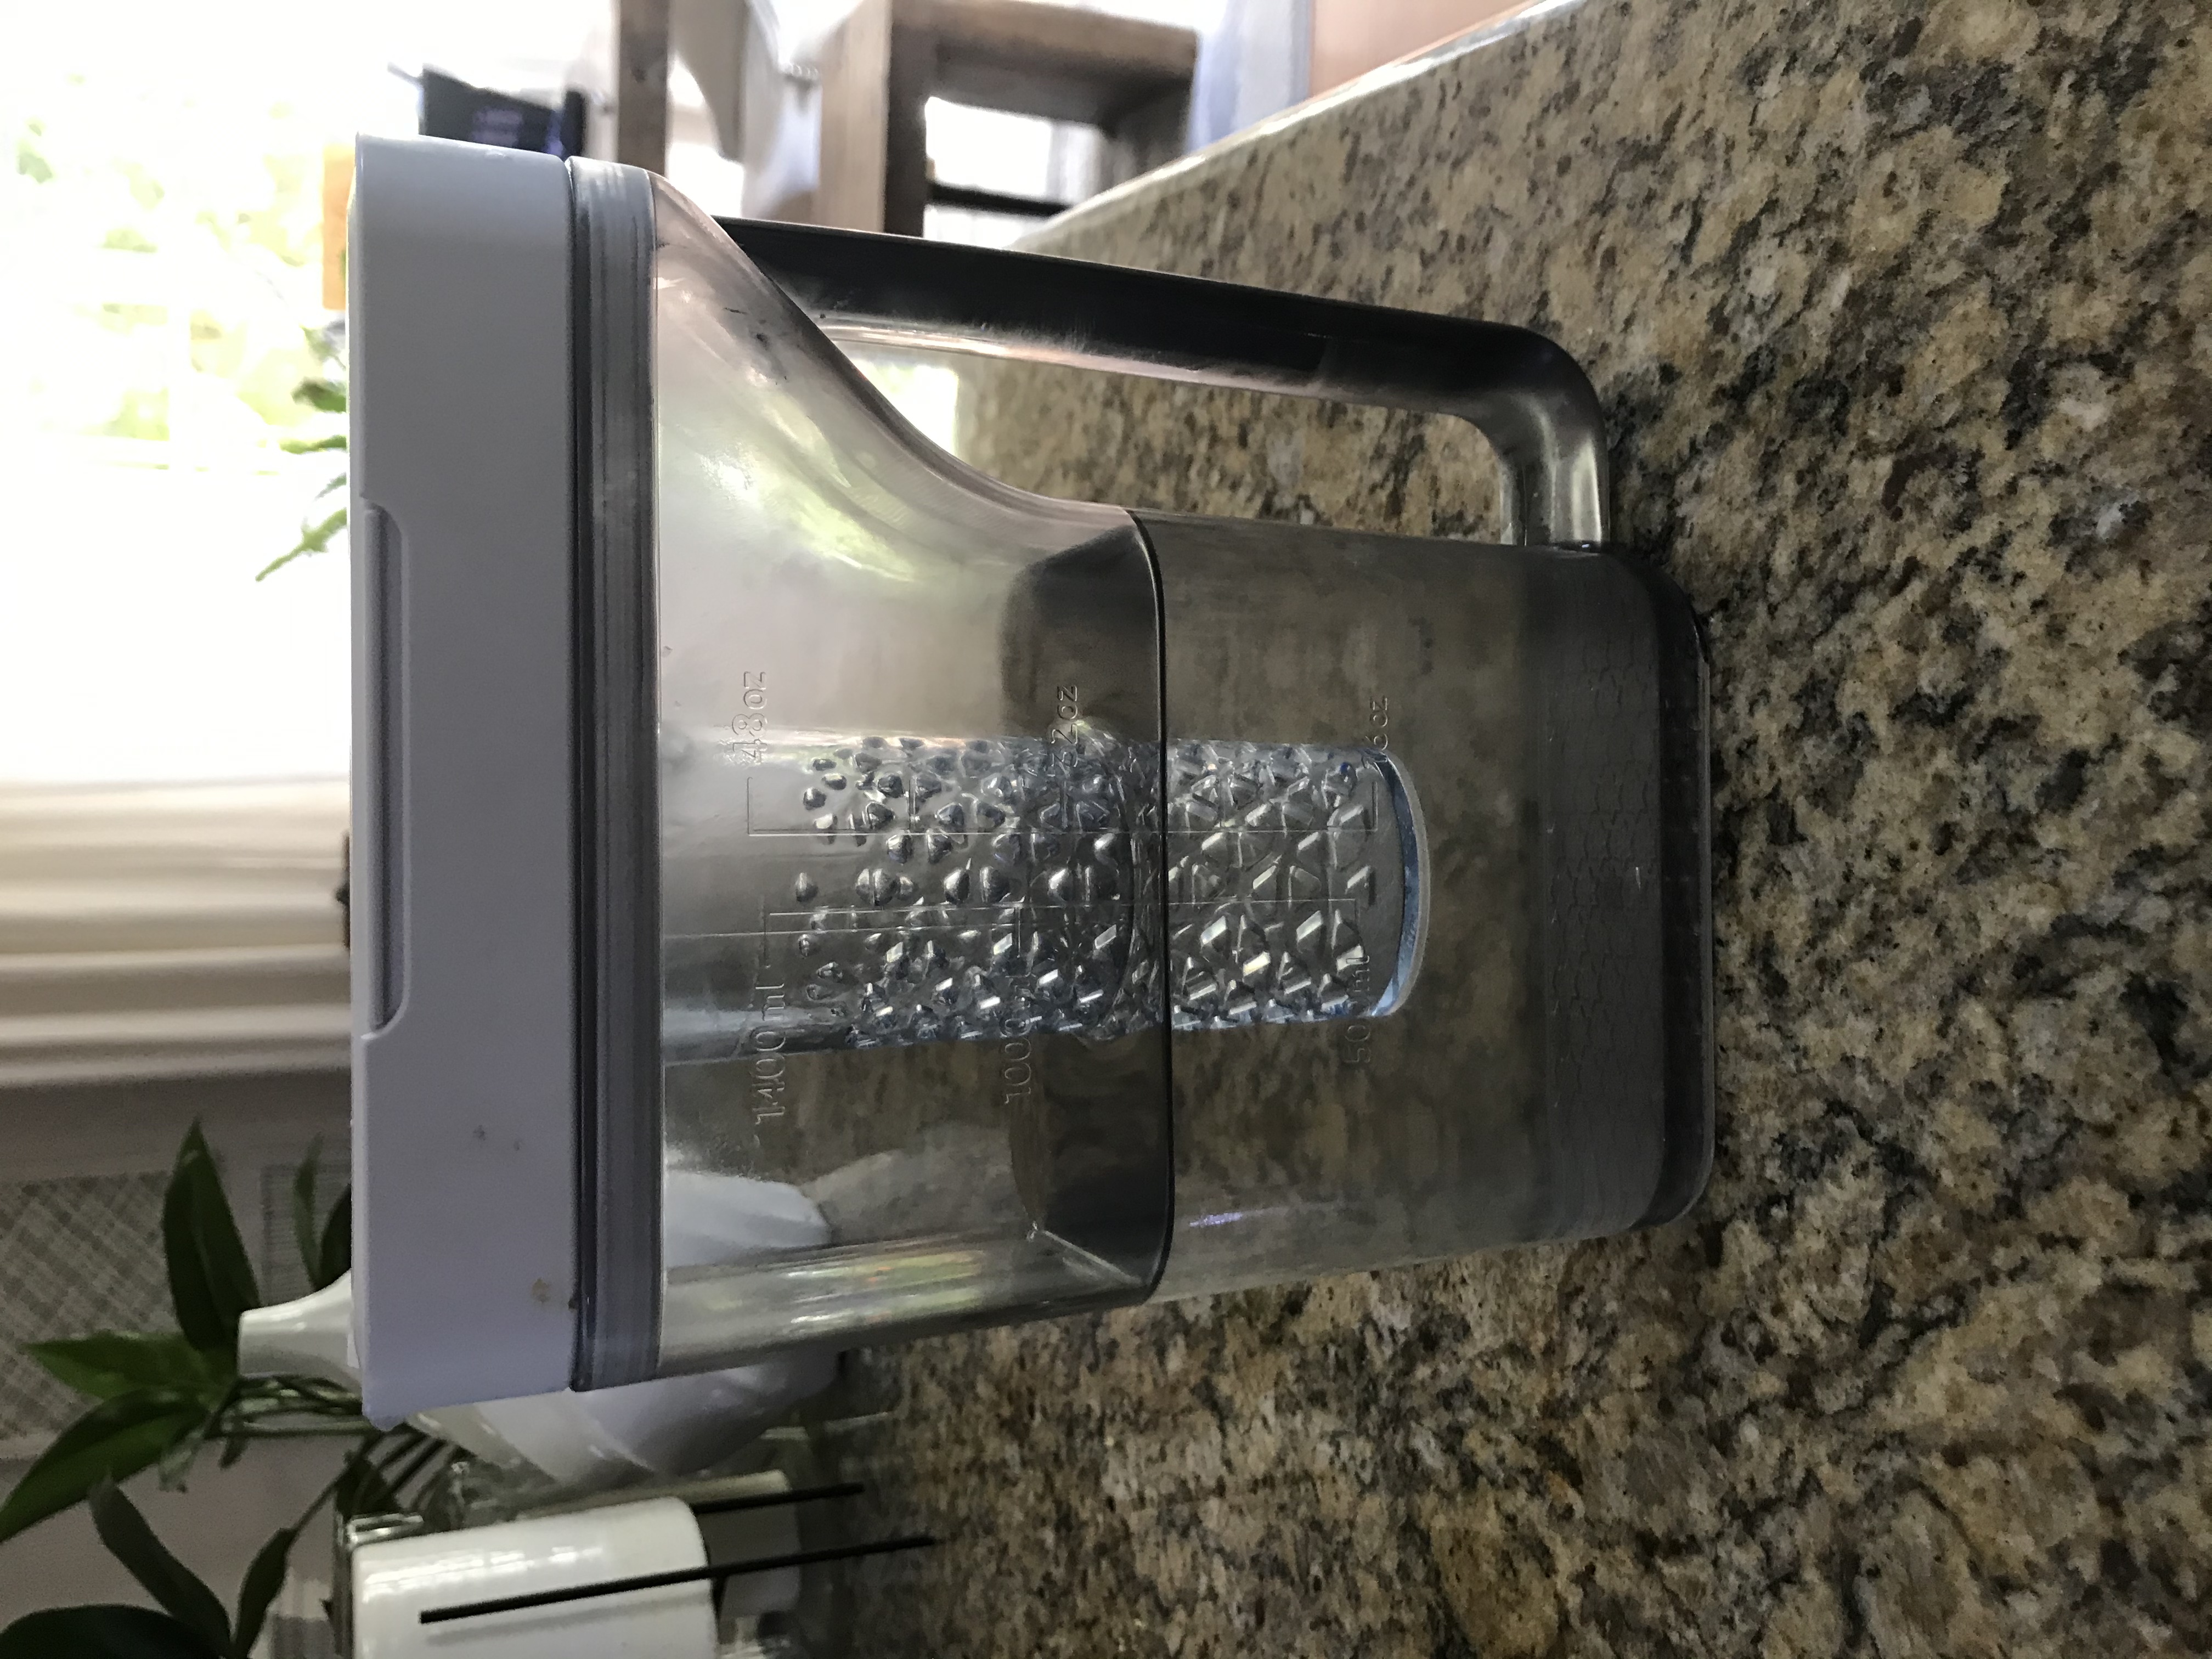 Solved: Refrigerator auto-fill water pitcher leaks - Page 5 - Samsung ...